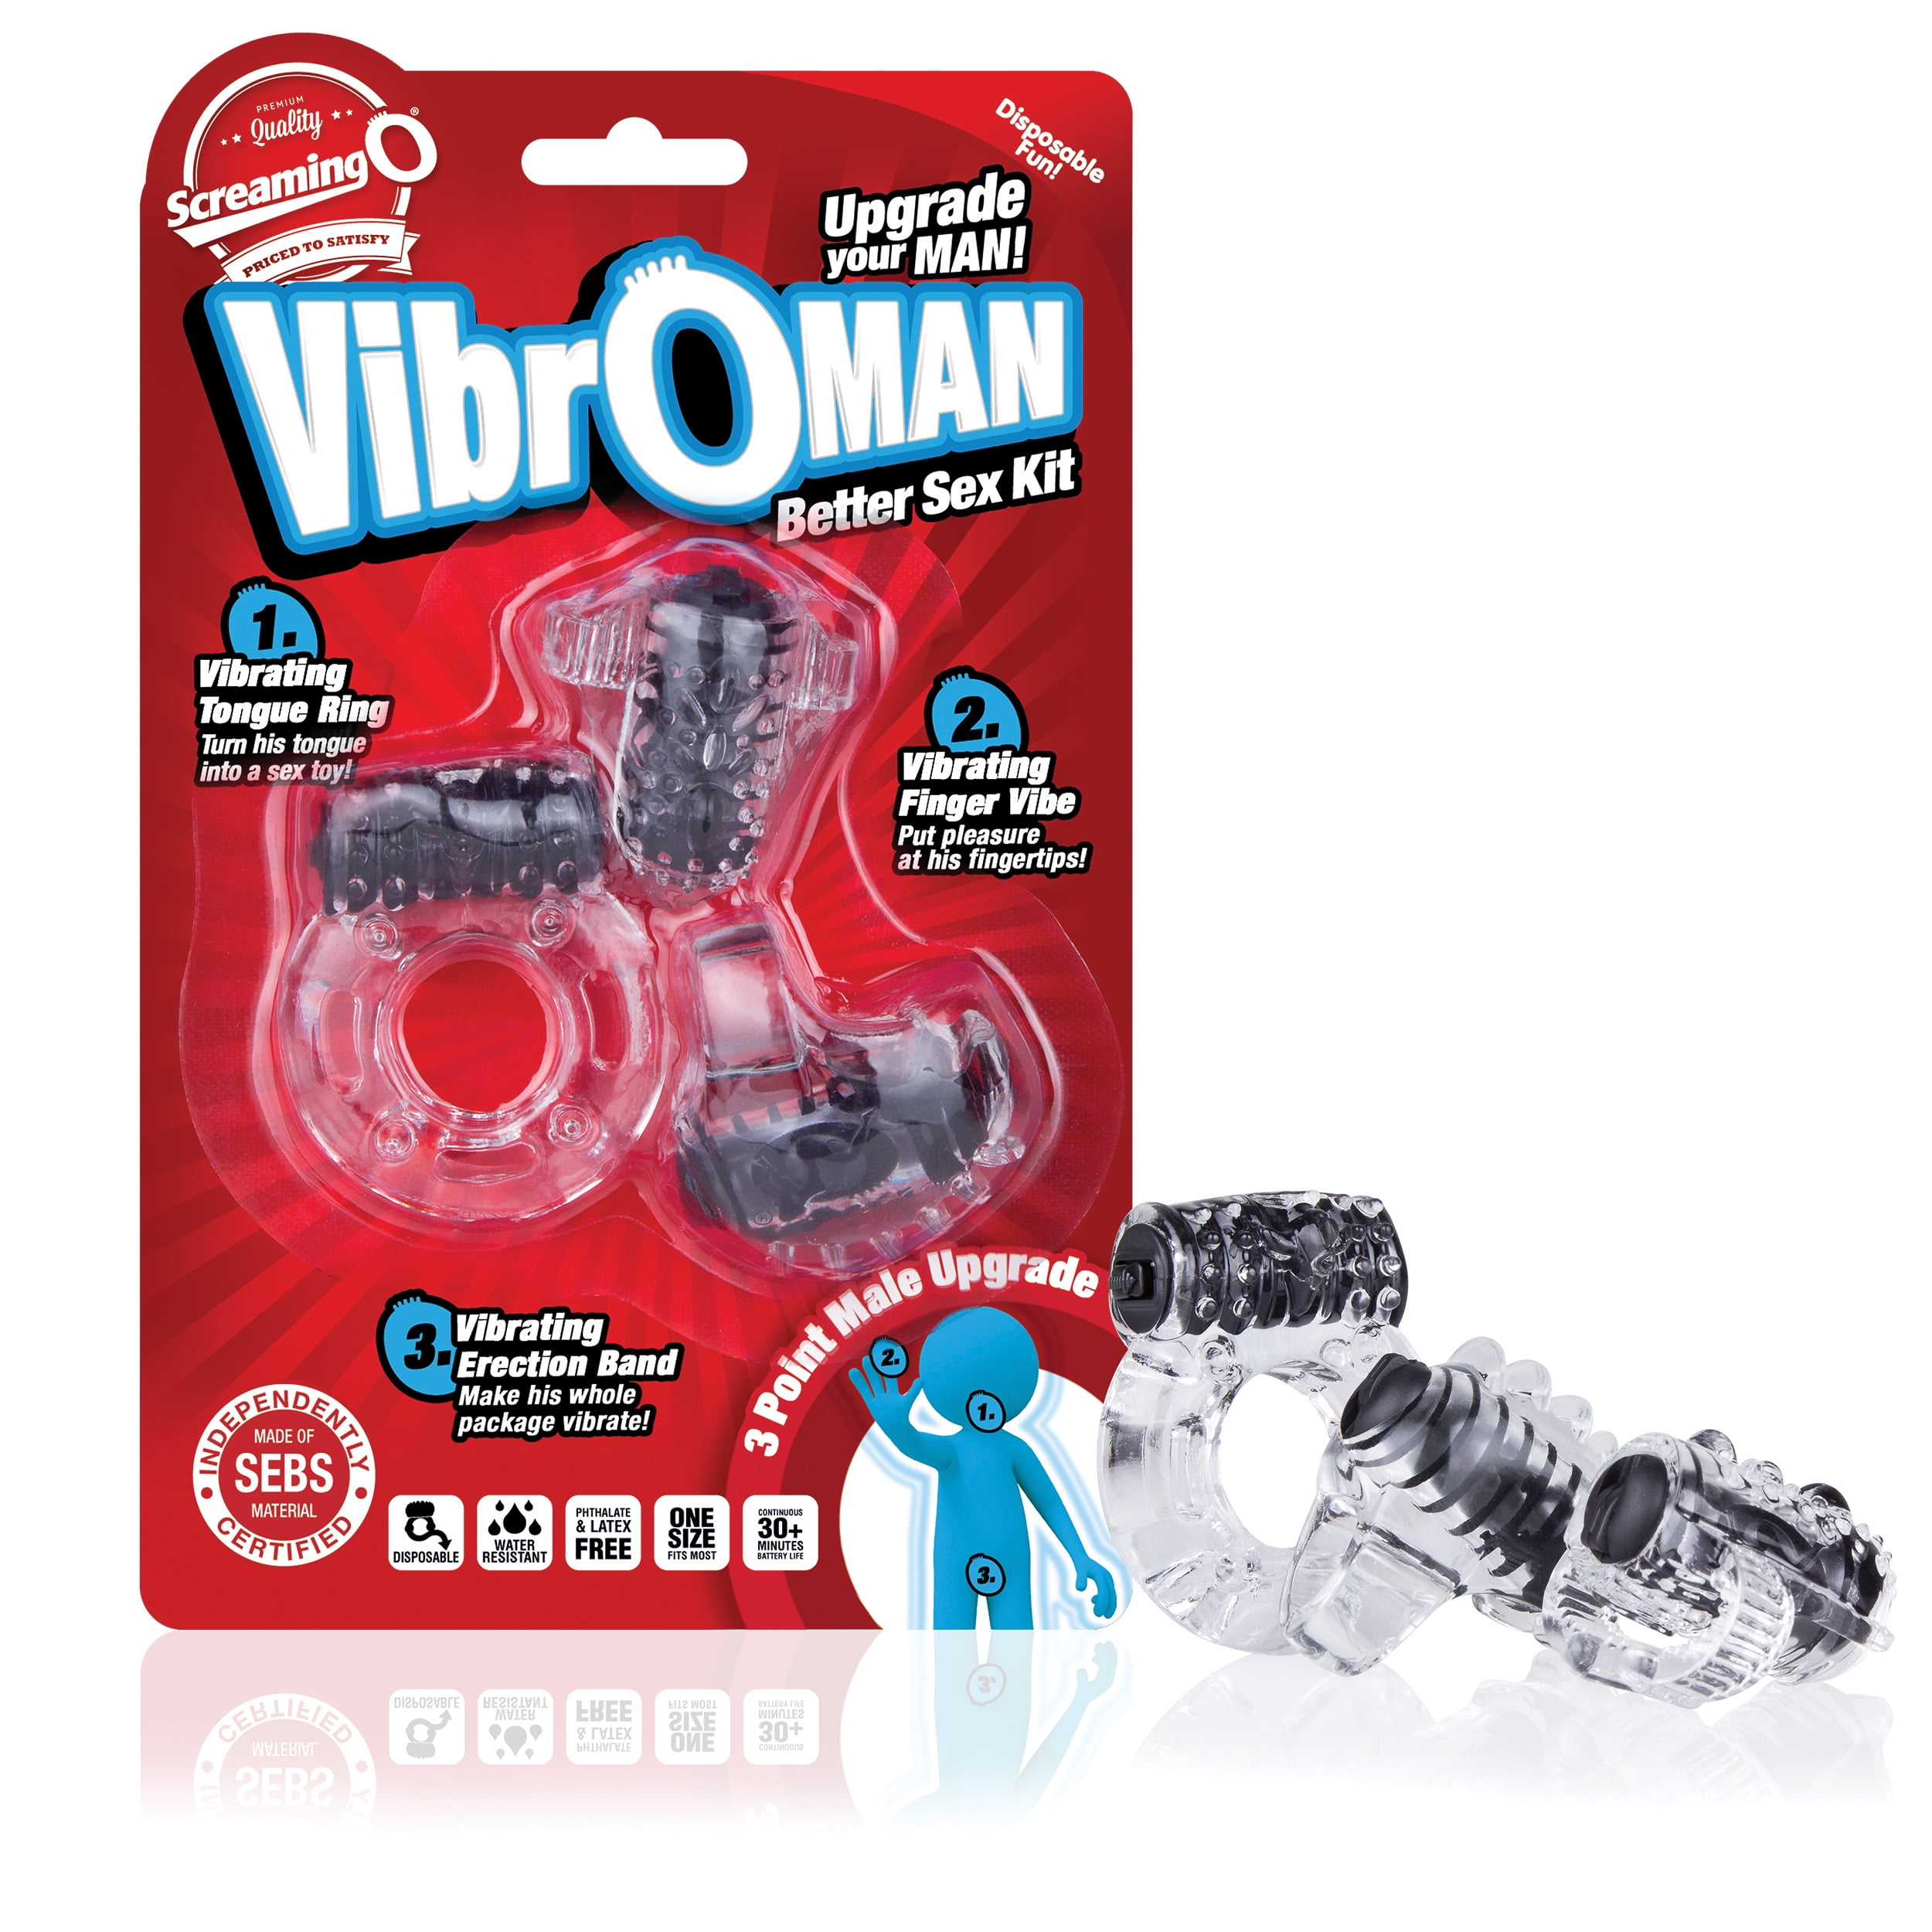 Vibroman Three Piece Couples Sex Kit by Screaming O Pleasure Products, Includes Vibrating Tongue Ring, Finger Vibrator and Vibrating Erection Band 